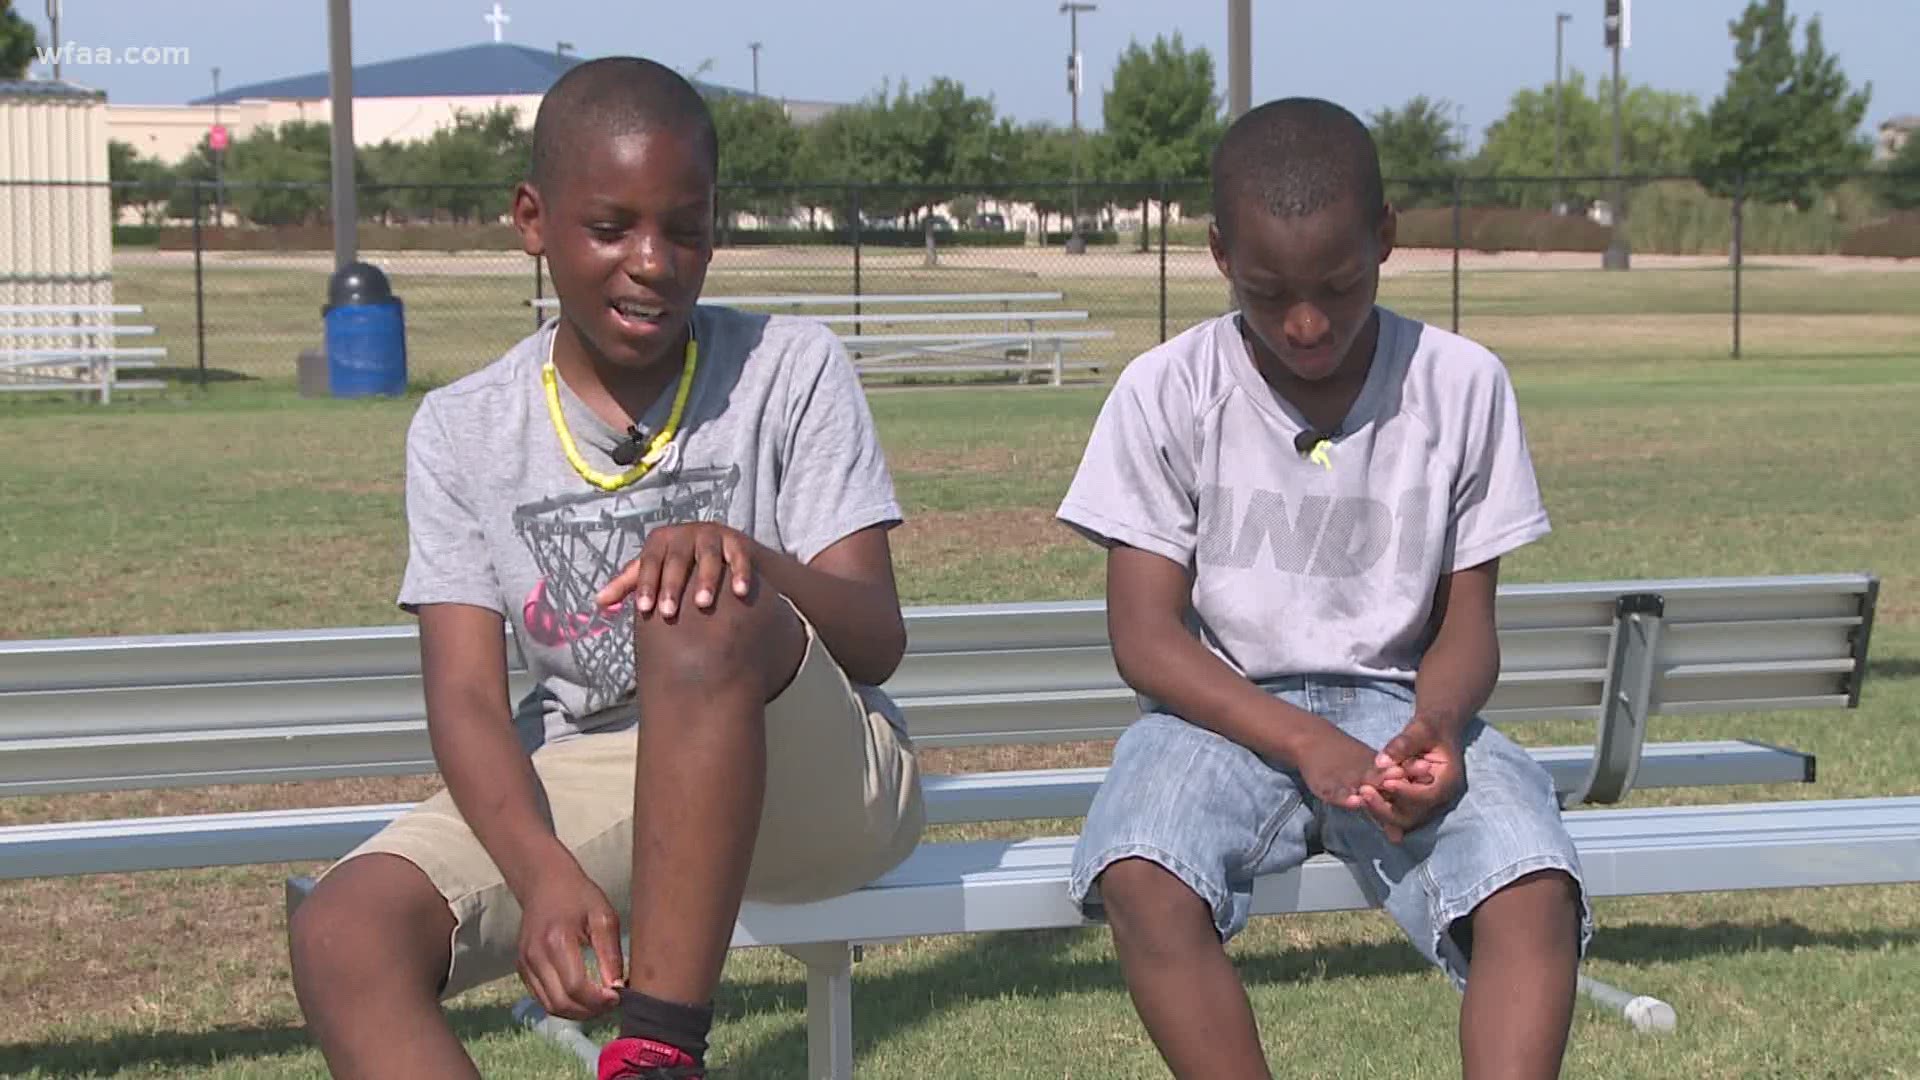 Mijal is now 11 years old and Messiah is 13. They've been in foster care seven years. WFAA feature them on 'Wednesday's Child' over a year ago.